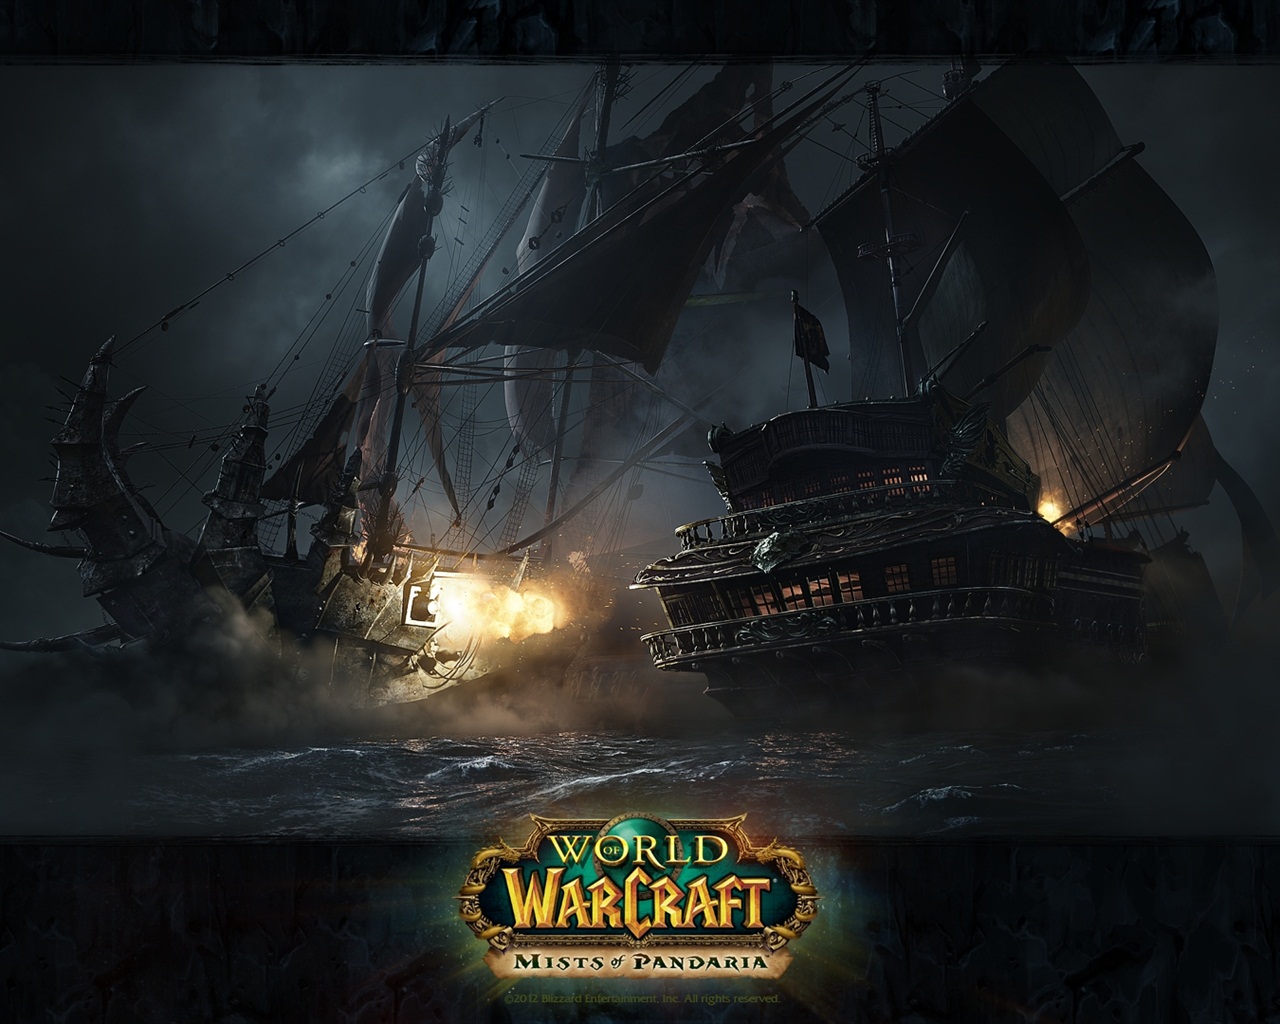 World of Warcraft: Mists of Pandaria HD wallpapers #5 - 1280x1024